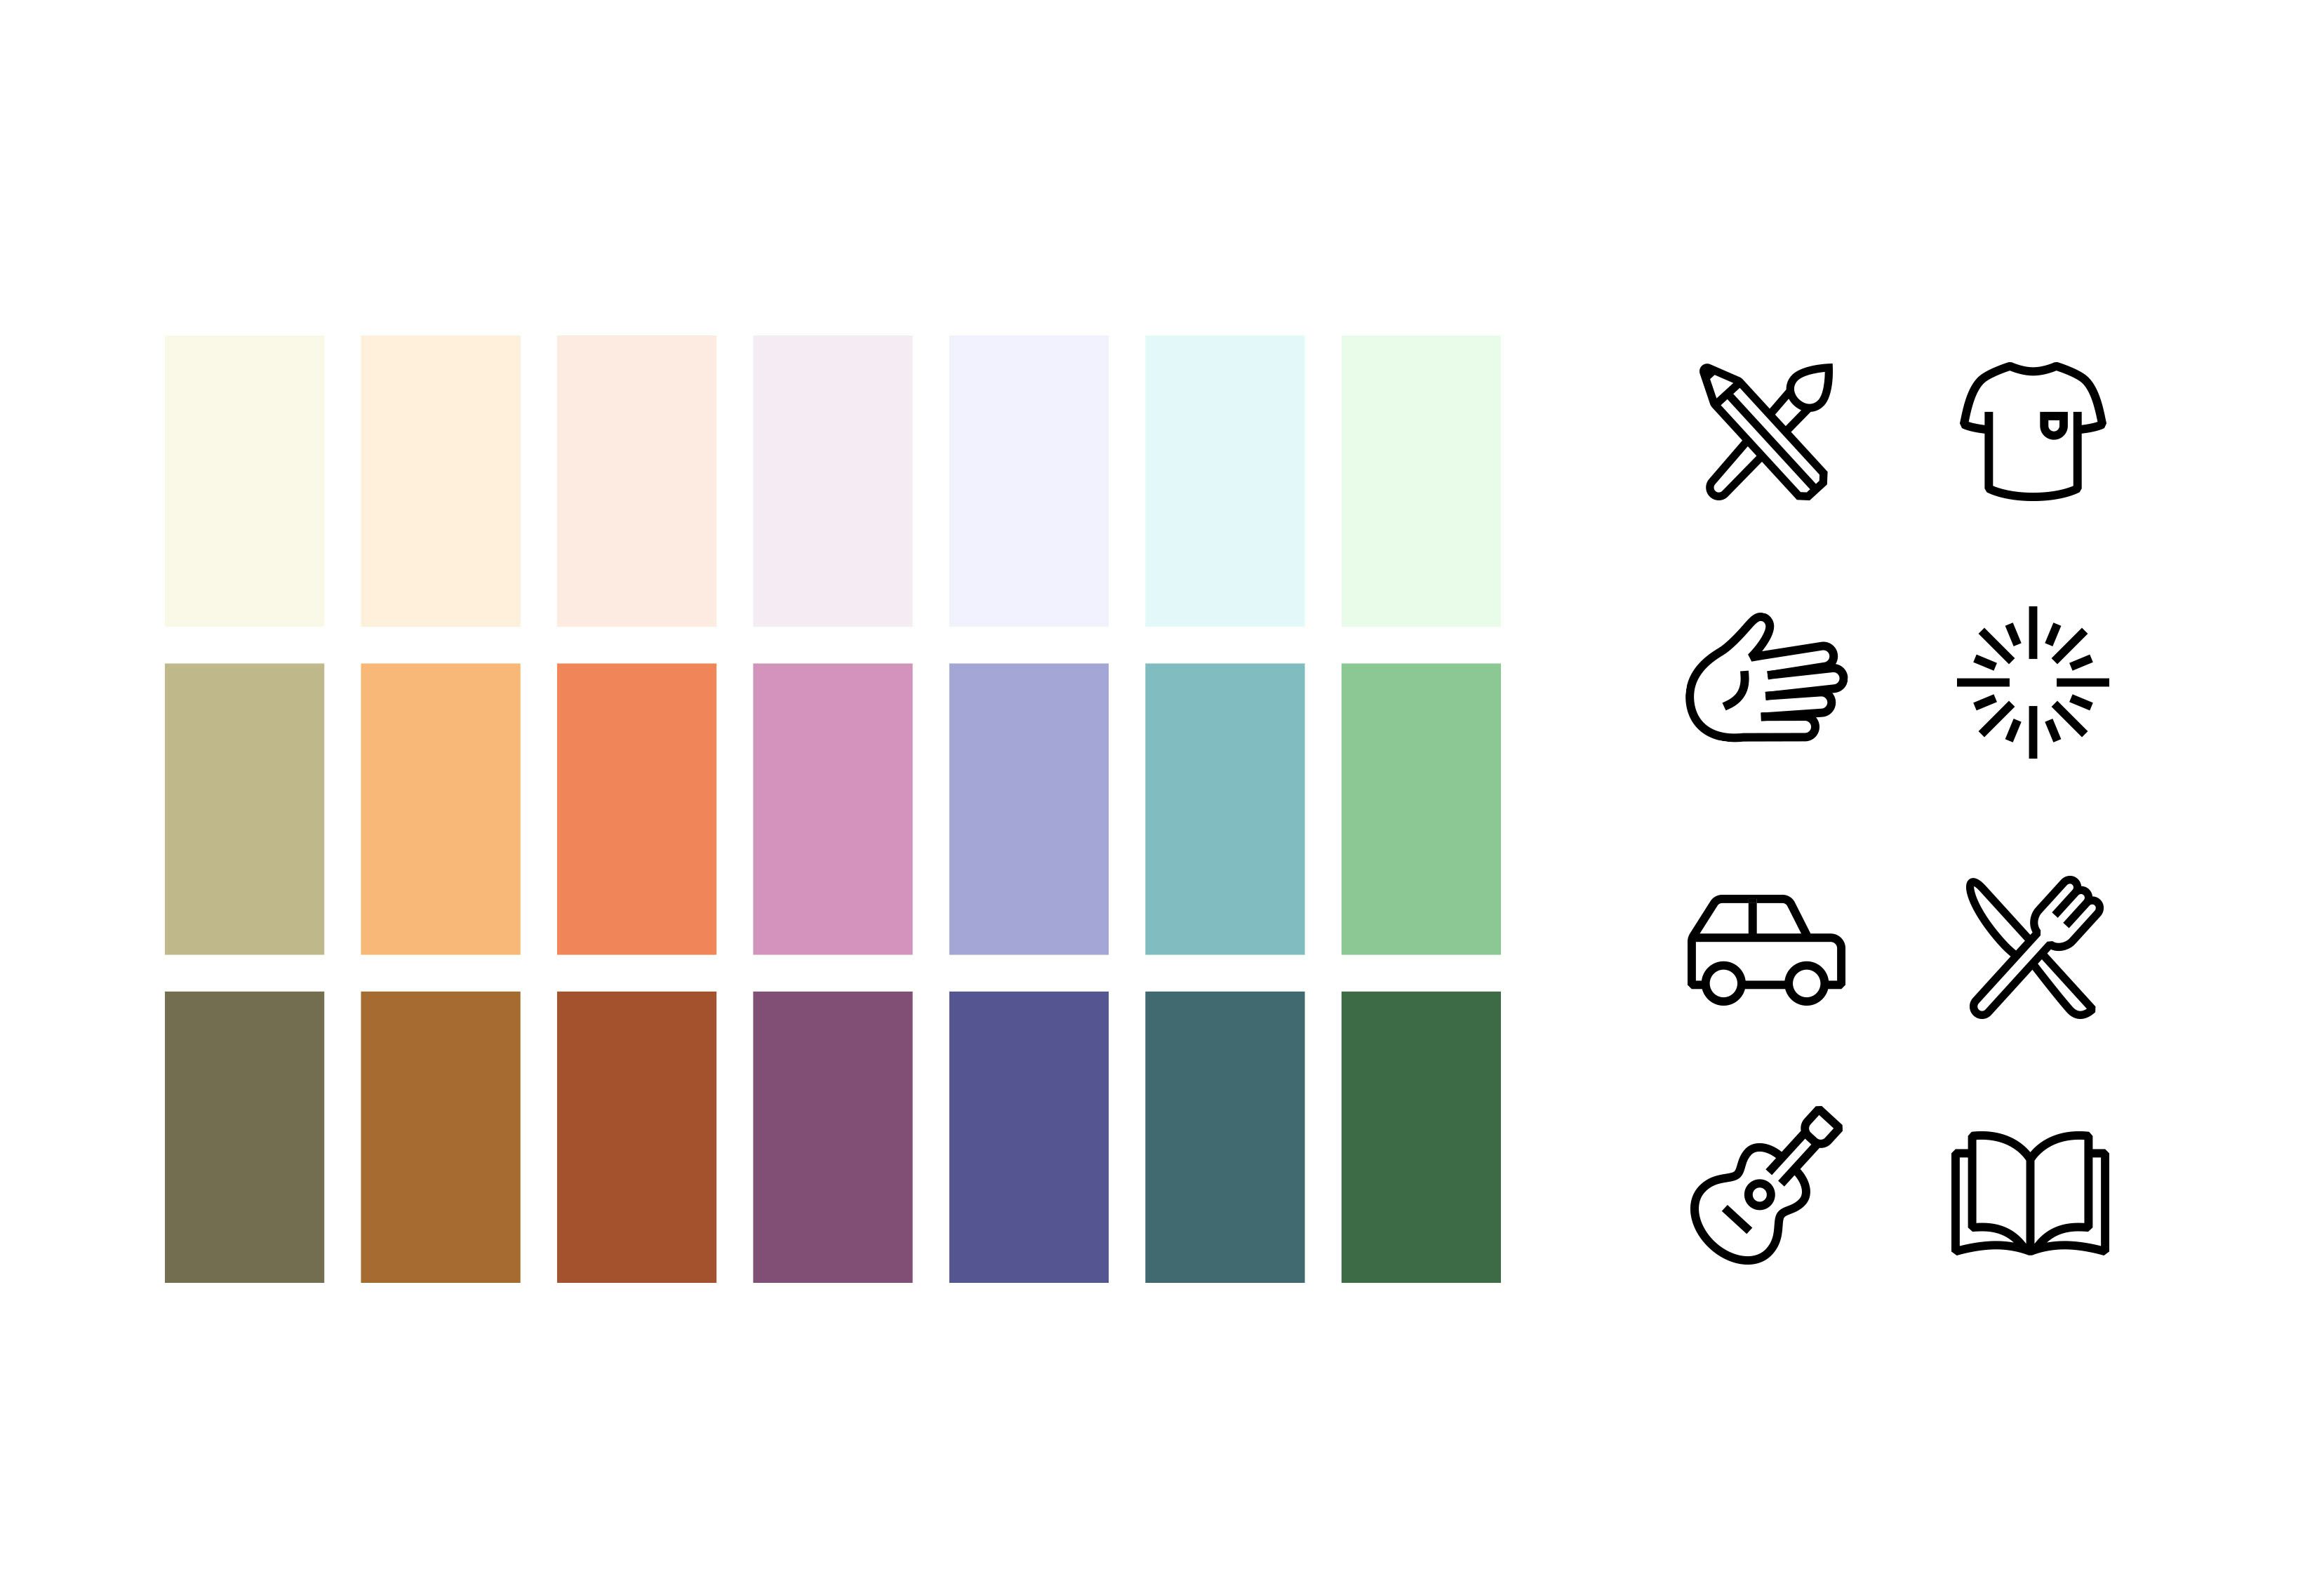 Colour palette and icons for the new CityLight Church brand.